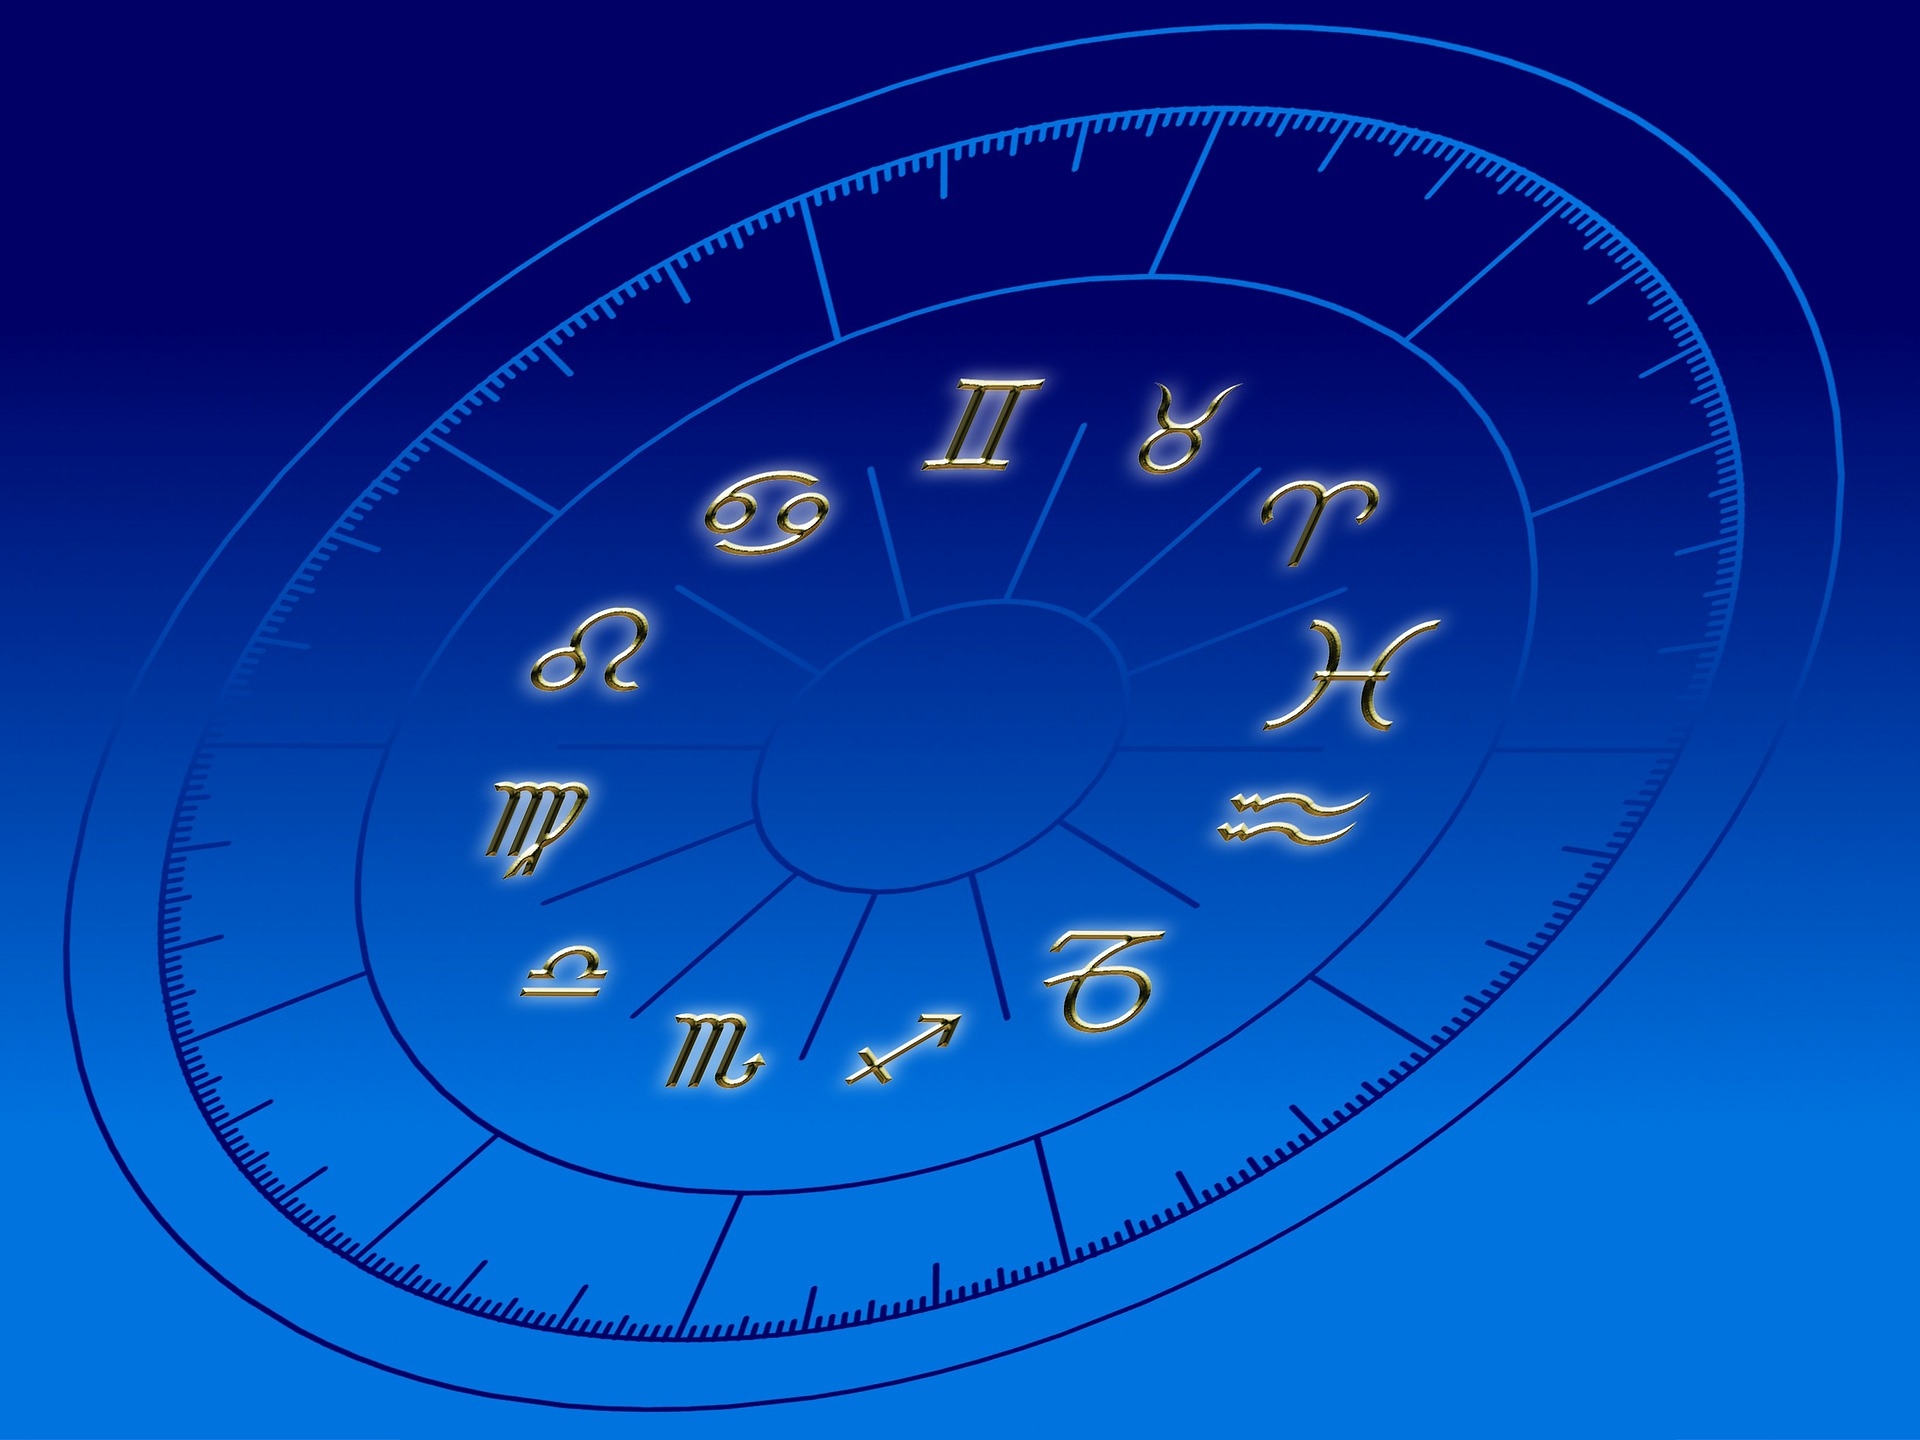 Weekly horoscope September 19-25: Check predictions for Aries, Taurus, Gemini and other signs